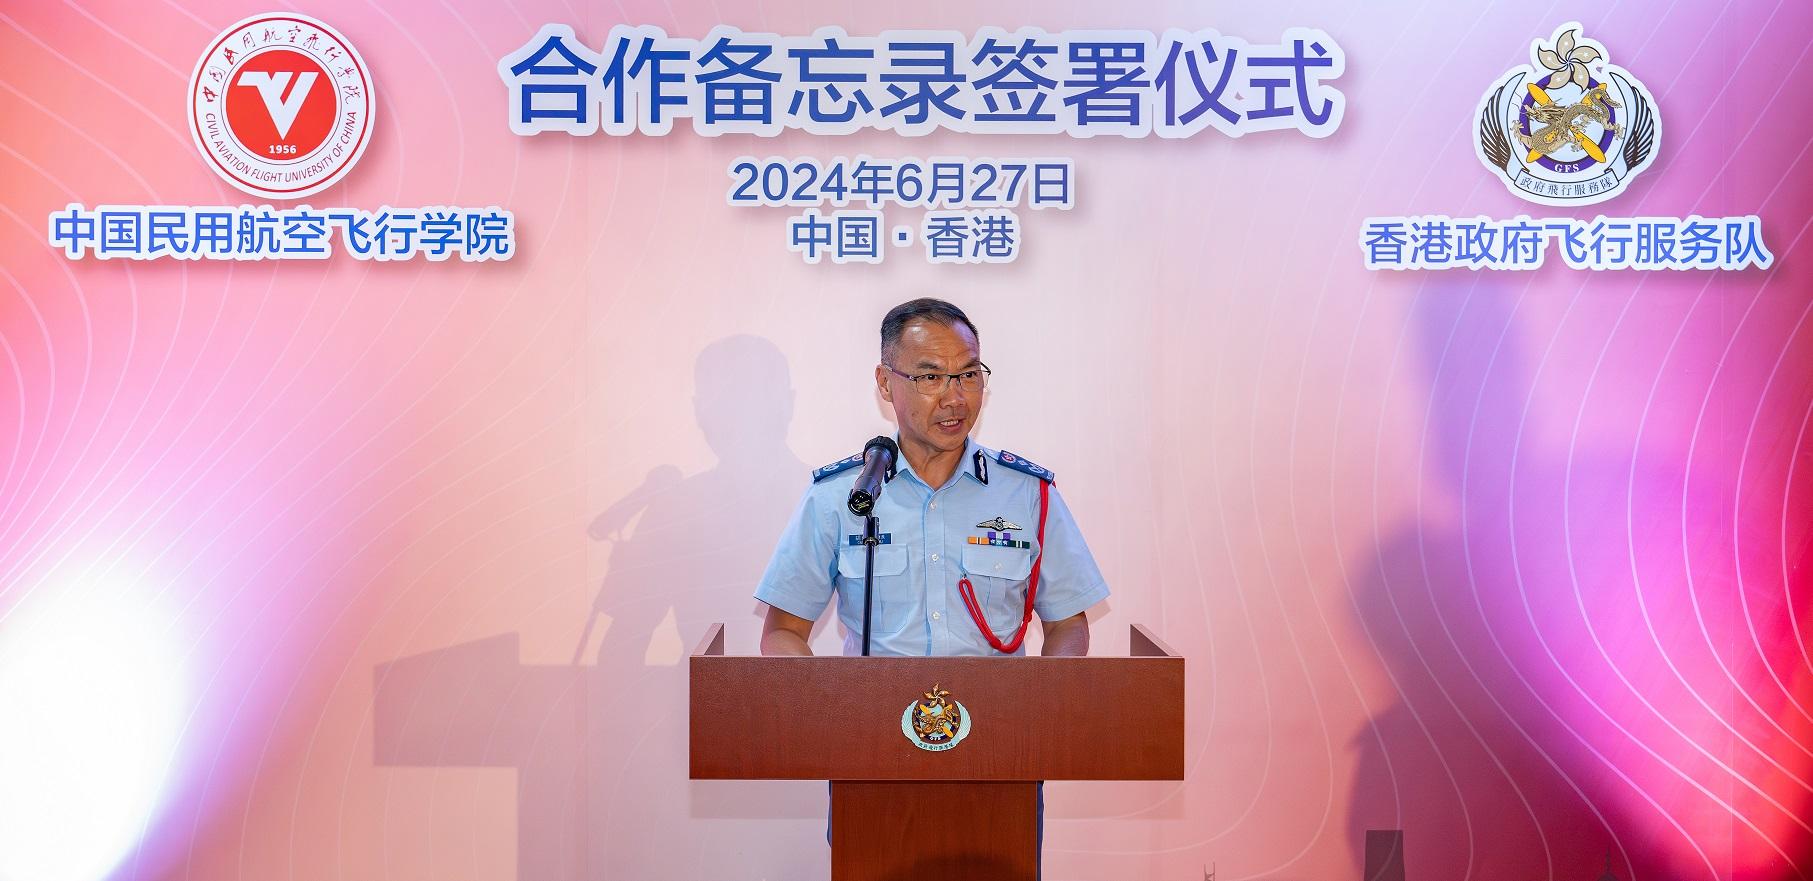 The Government Flying Service (GFS) and the Civil Aviation Flight University of China signed a memorandum of understanding today (June 27) to underpin closer collaboration. Photo shows the Controller of the GFS, Captain West Wu, delivering a speech at the signing ceremony.